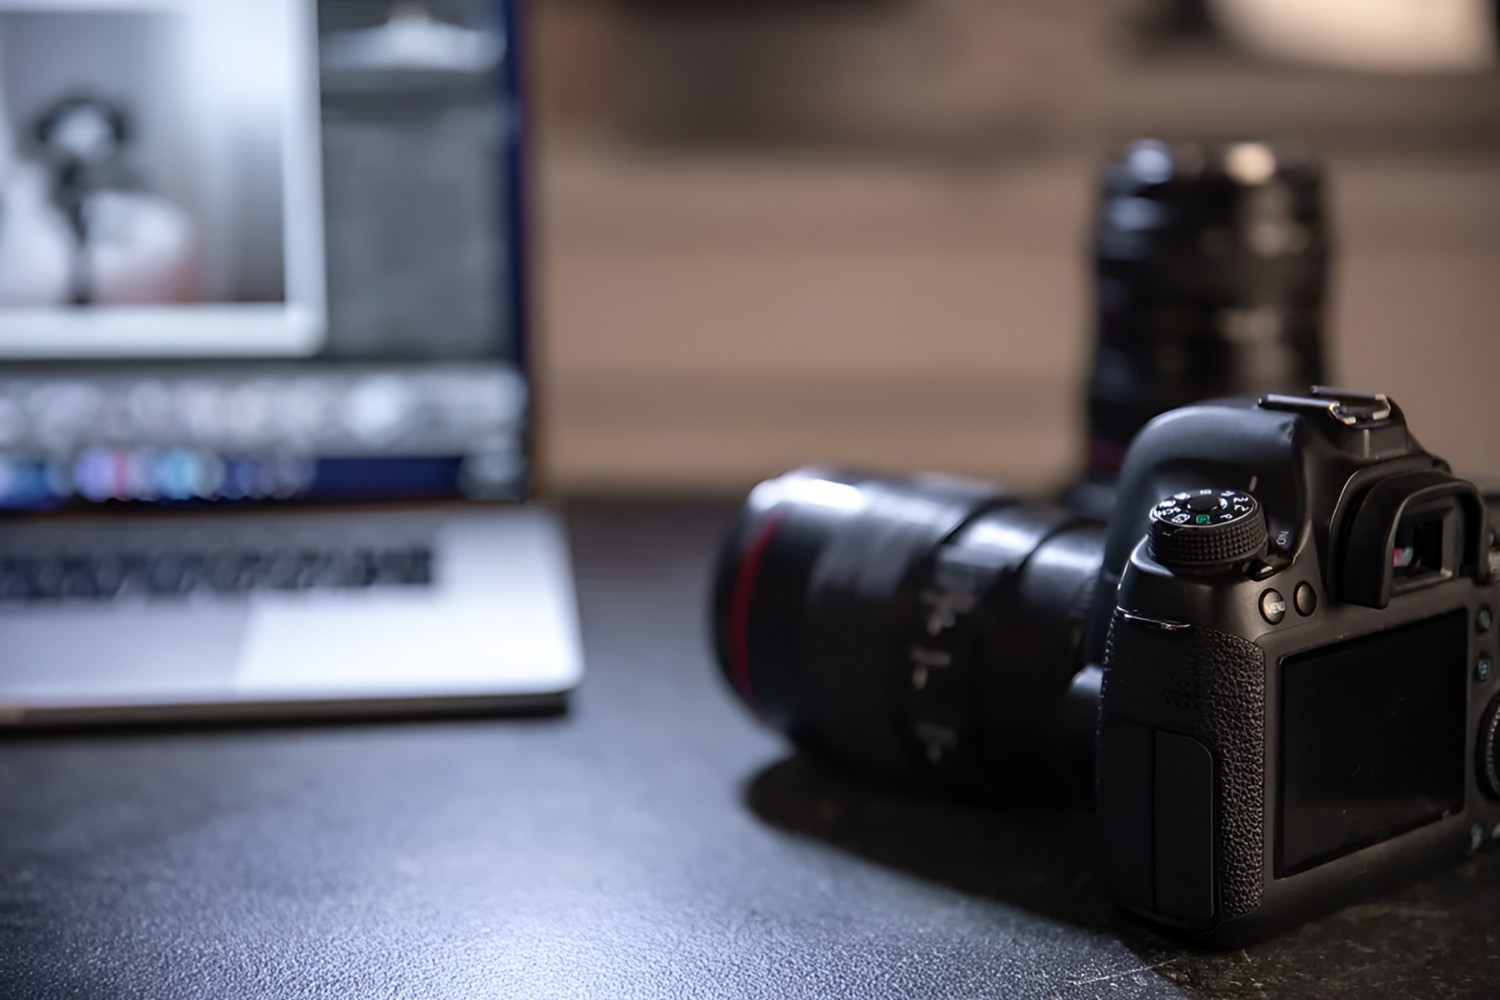 How To Connect A DSLR Camera To A MacBook